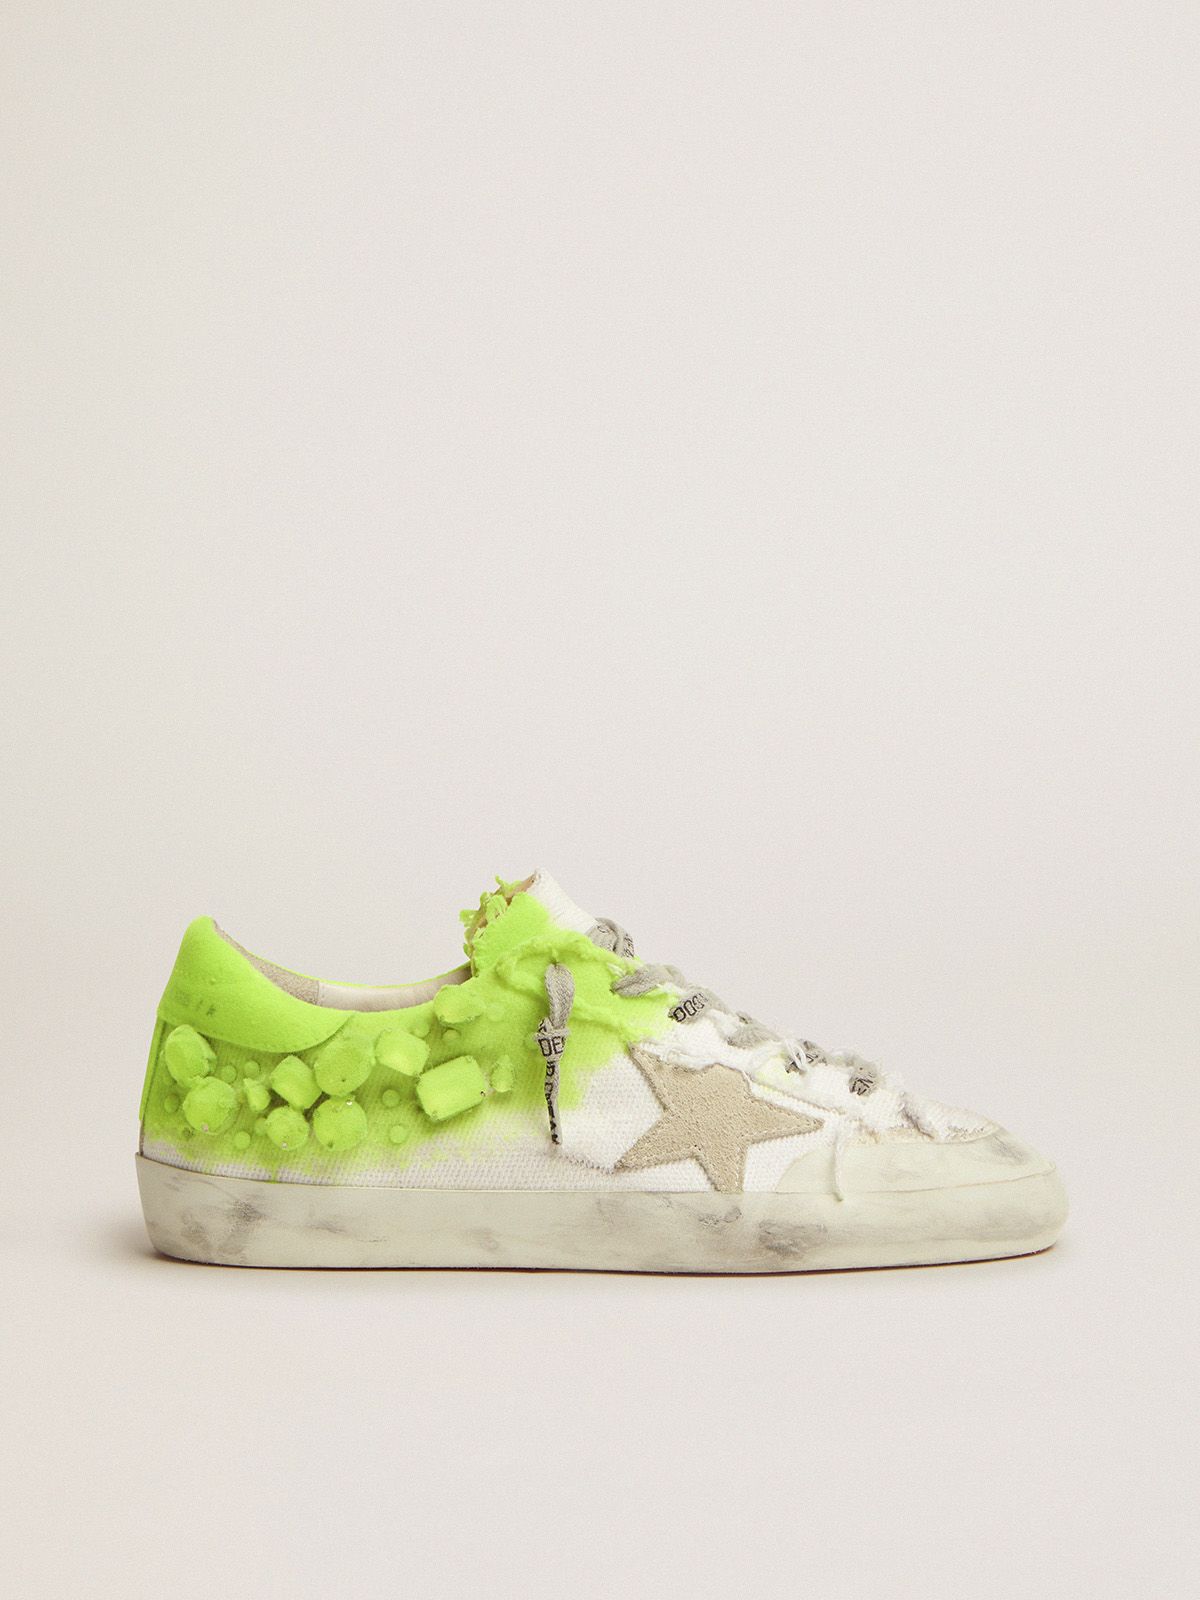 golden goose sneakers white and in paint crystals flock Super-Star yellow with fluorescent canvas